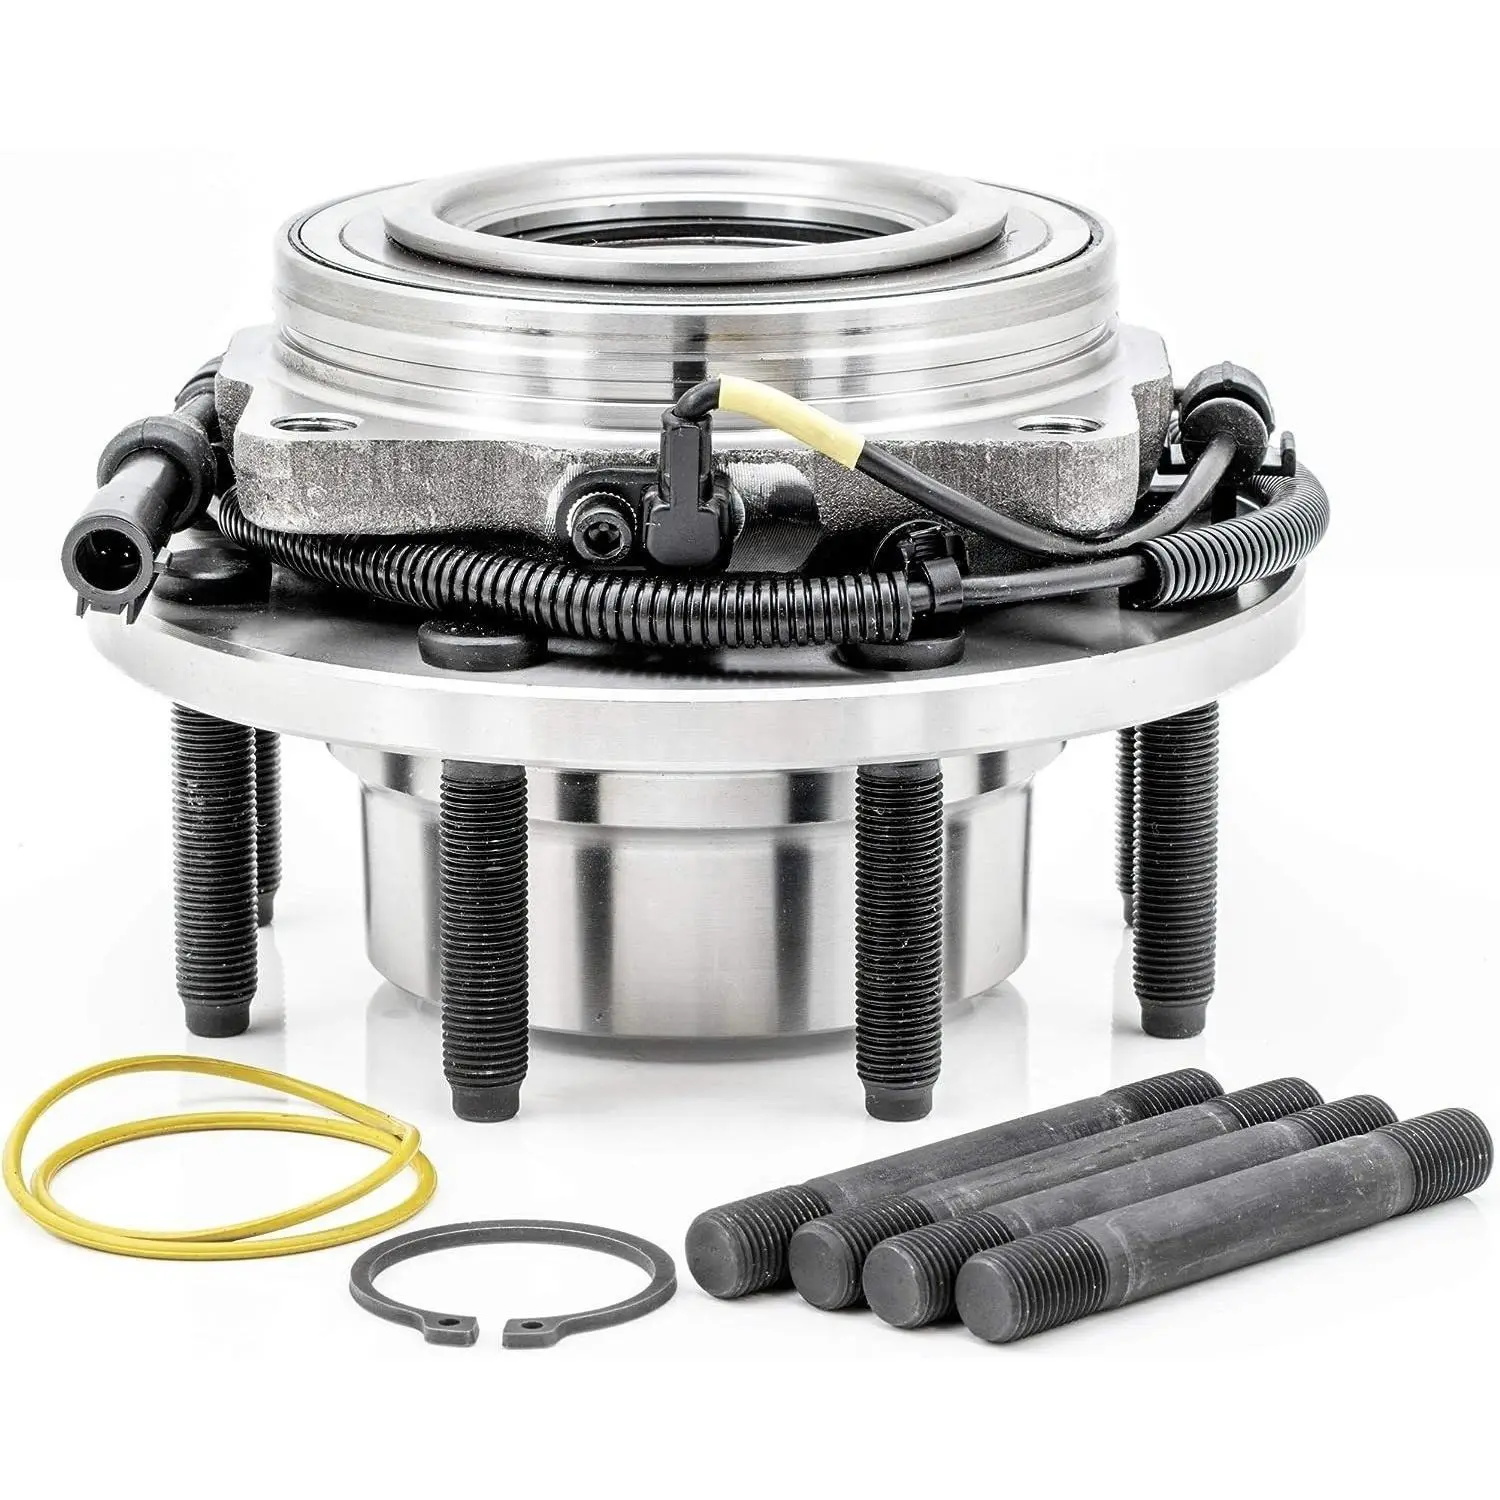 515081 Hub bearing For Ford F-250 Super Duty 2005-2010 F-350 Super Hub Bearing 4WD Front Left or Right one piece.